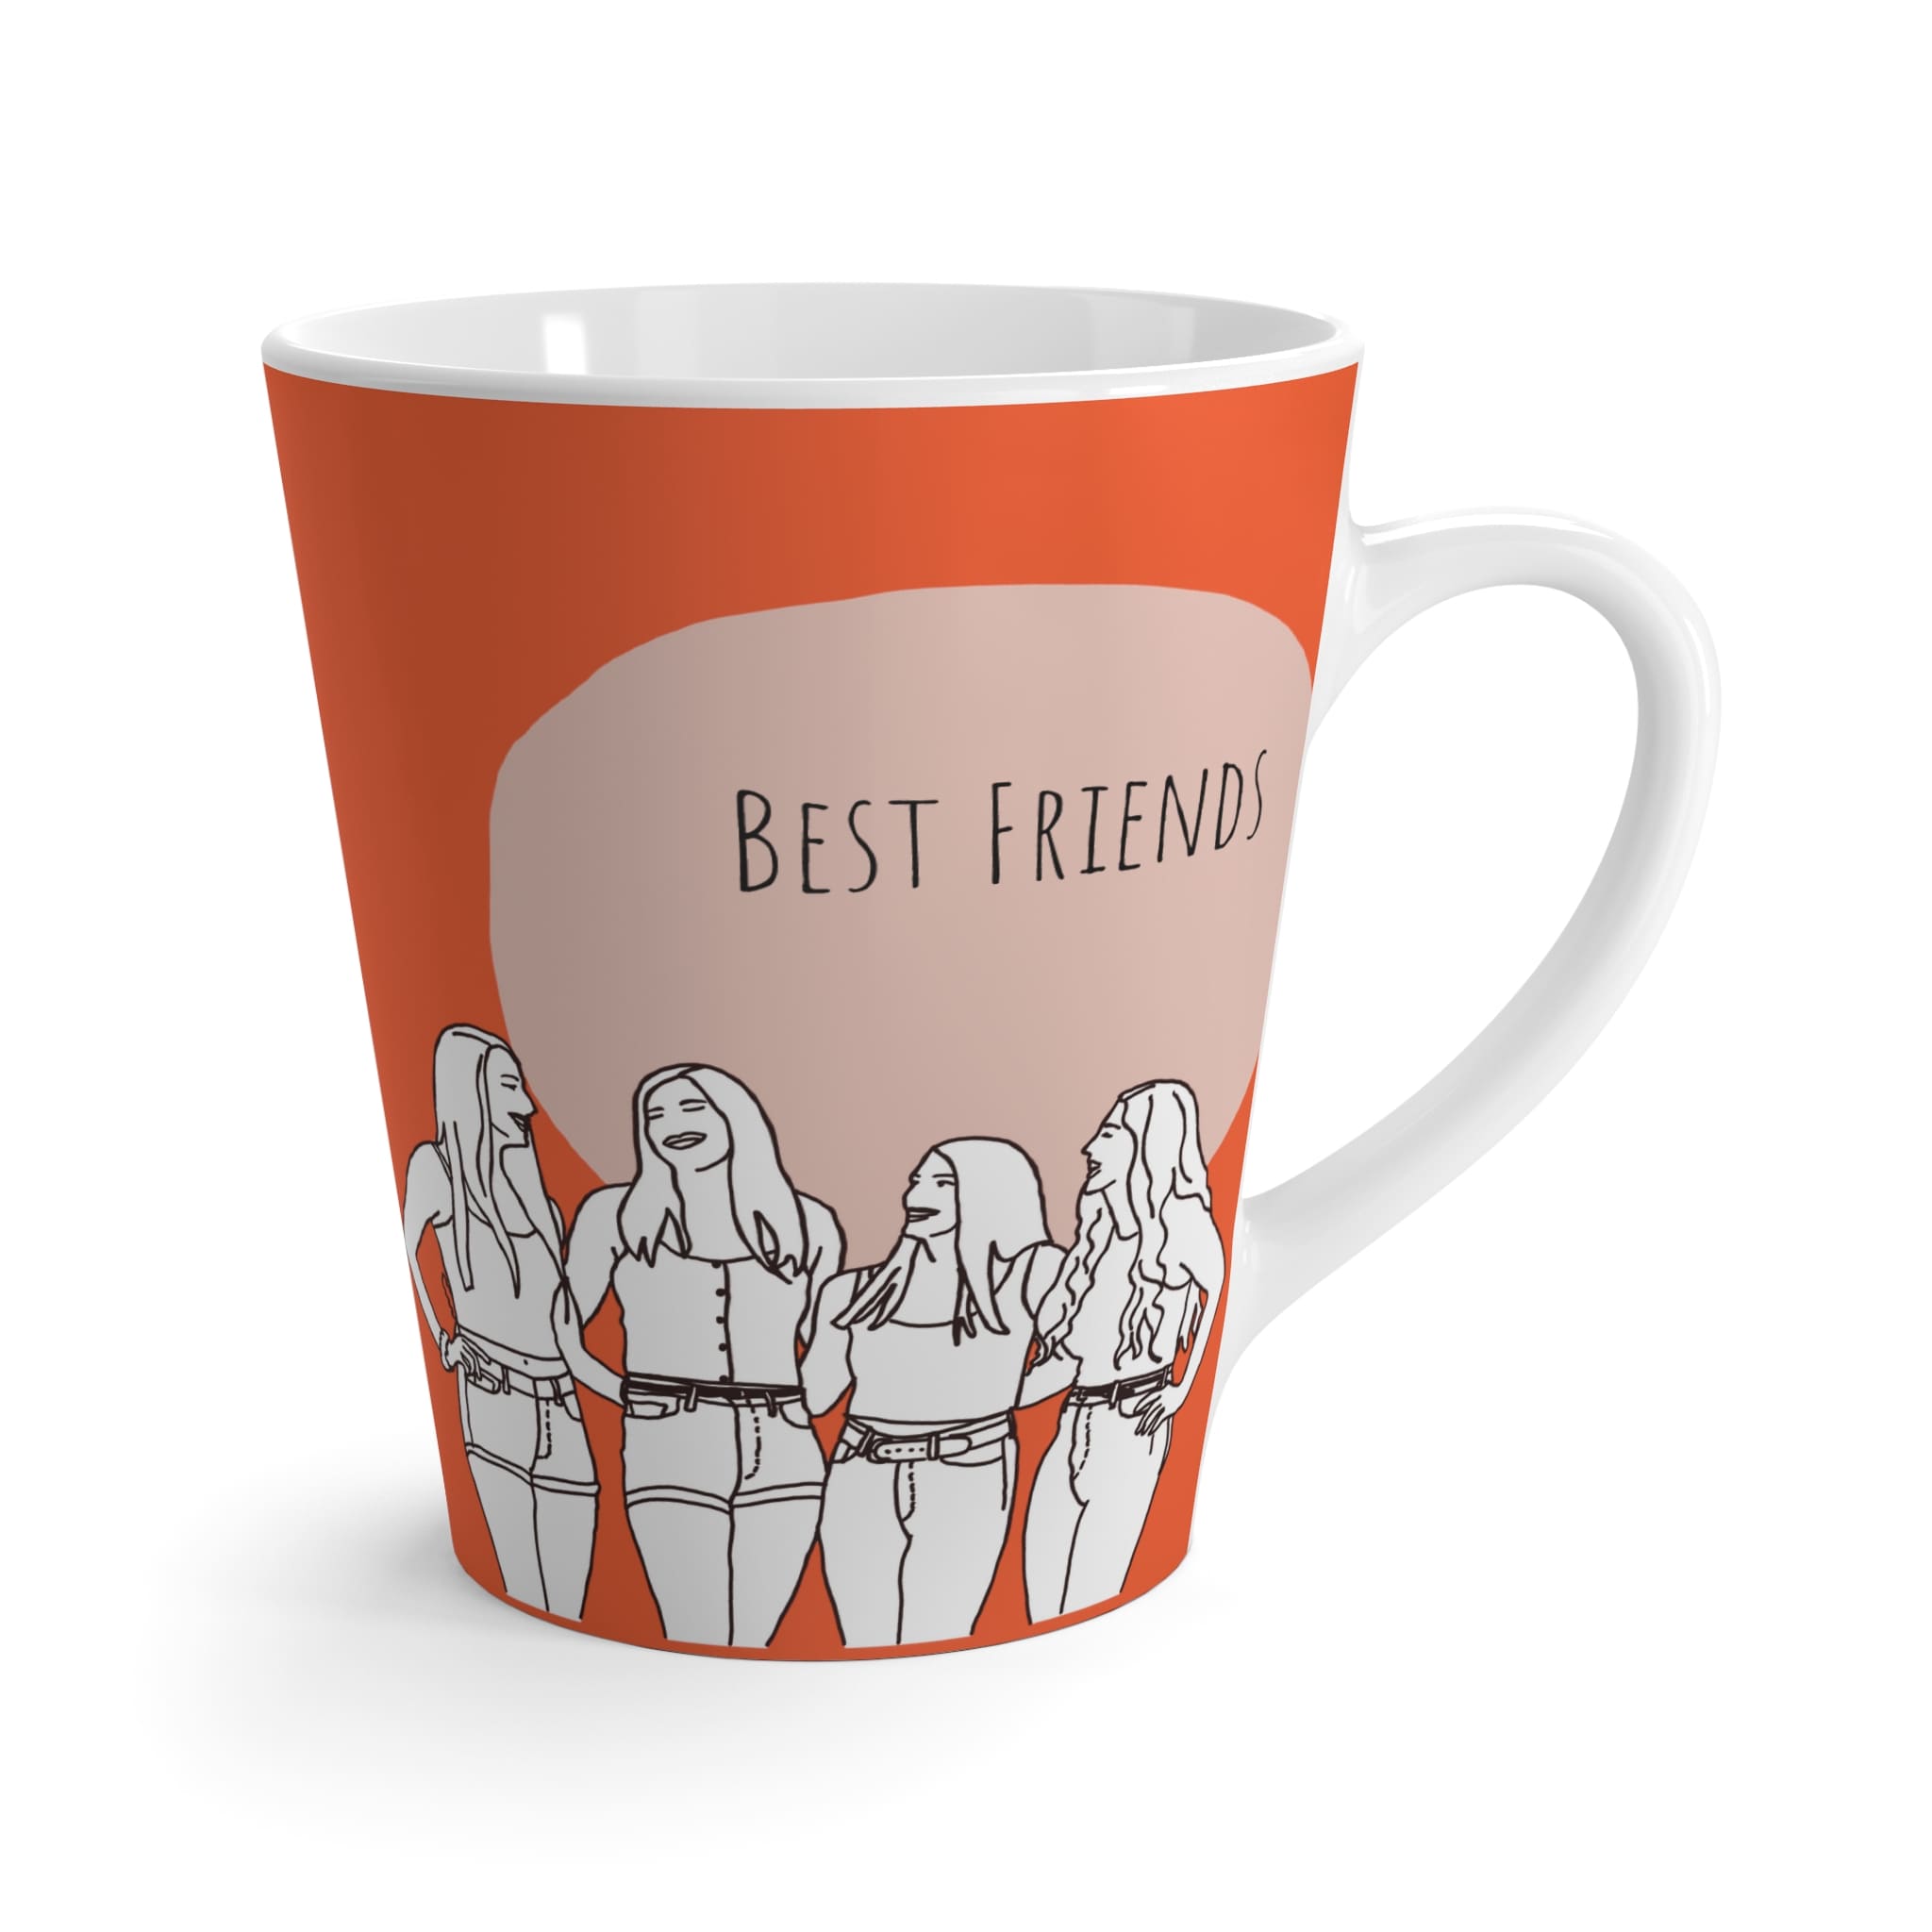 Team mug for besties customised with names personal quote and line art portrait from photo on fashion color blocking back ground